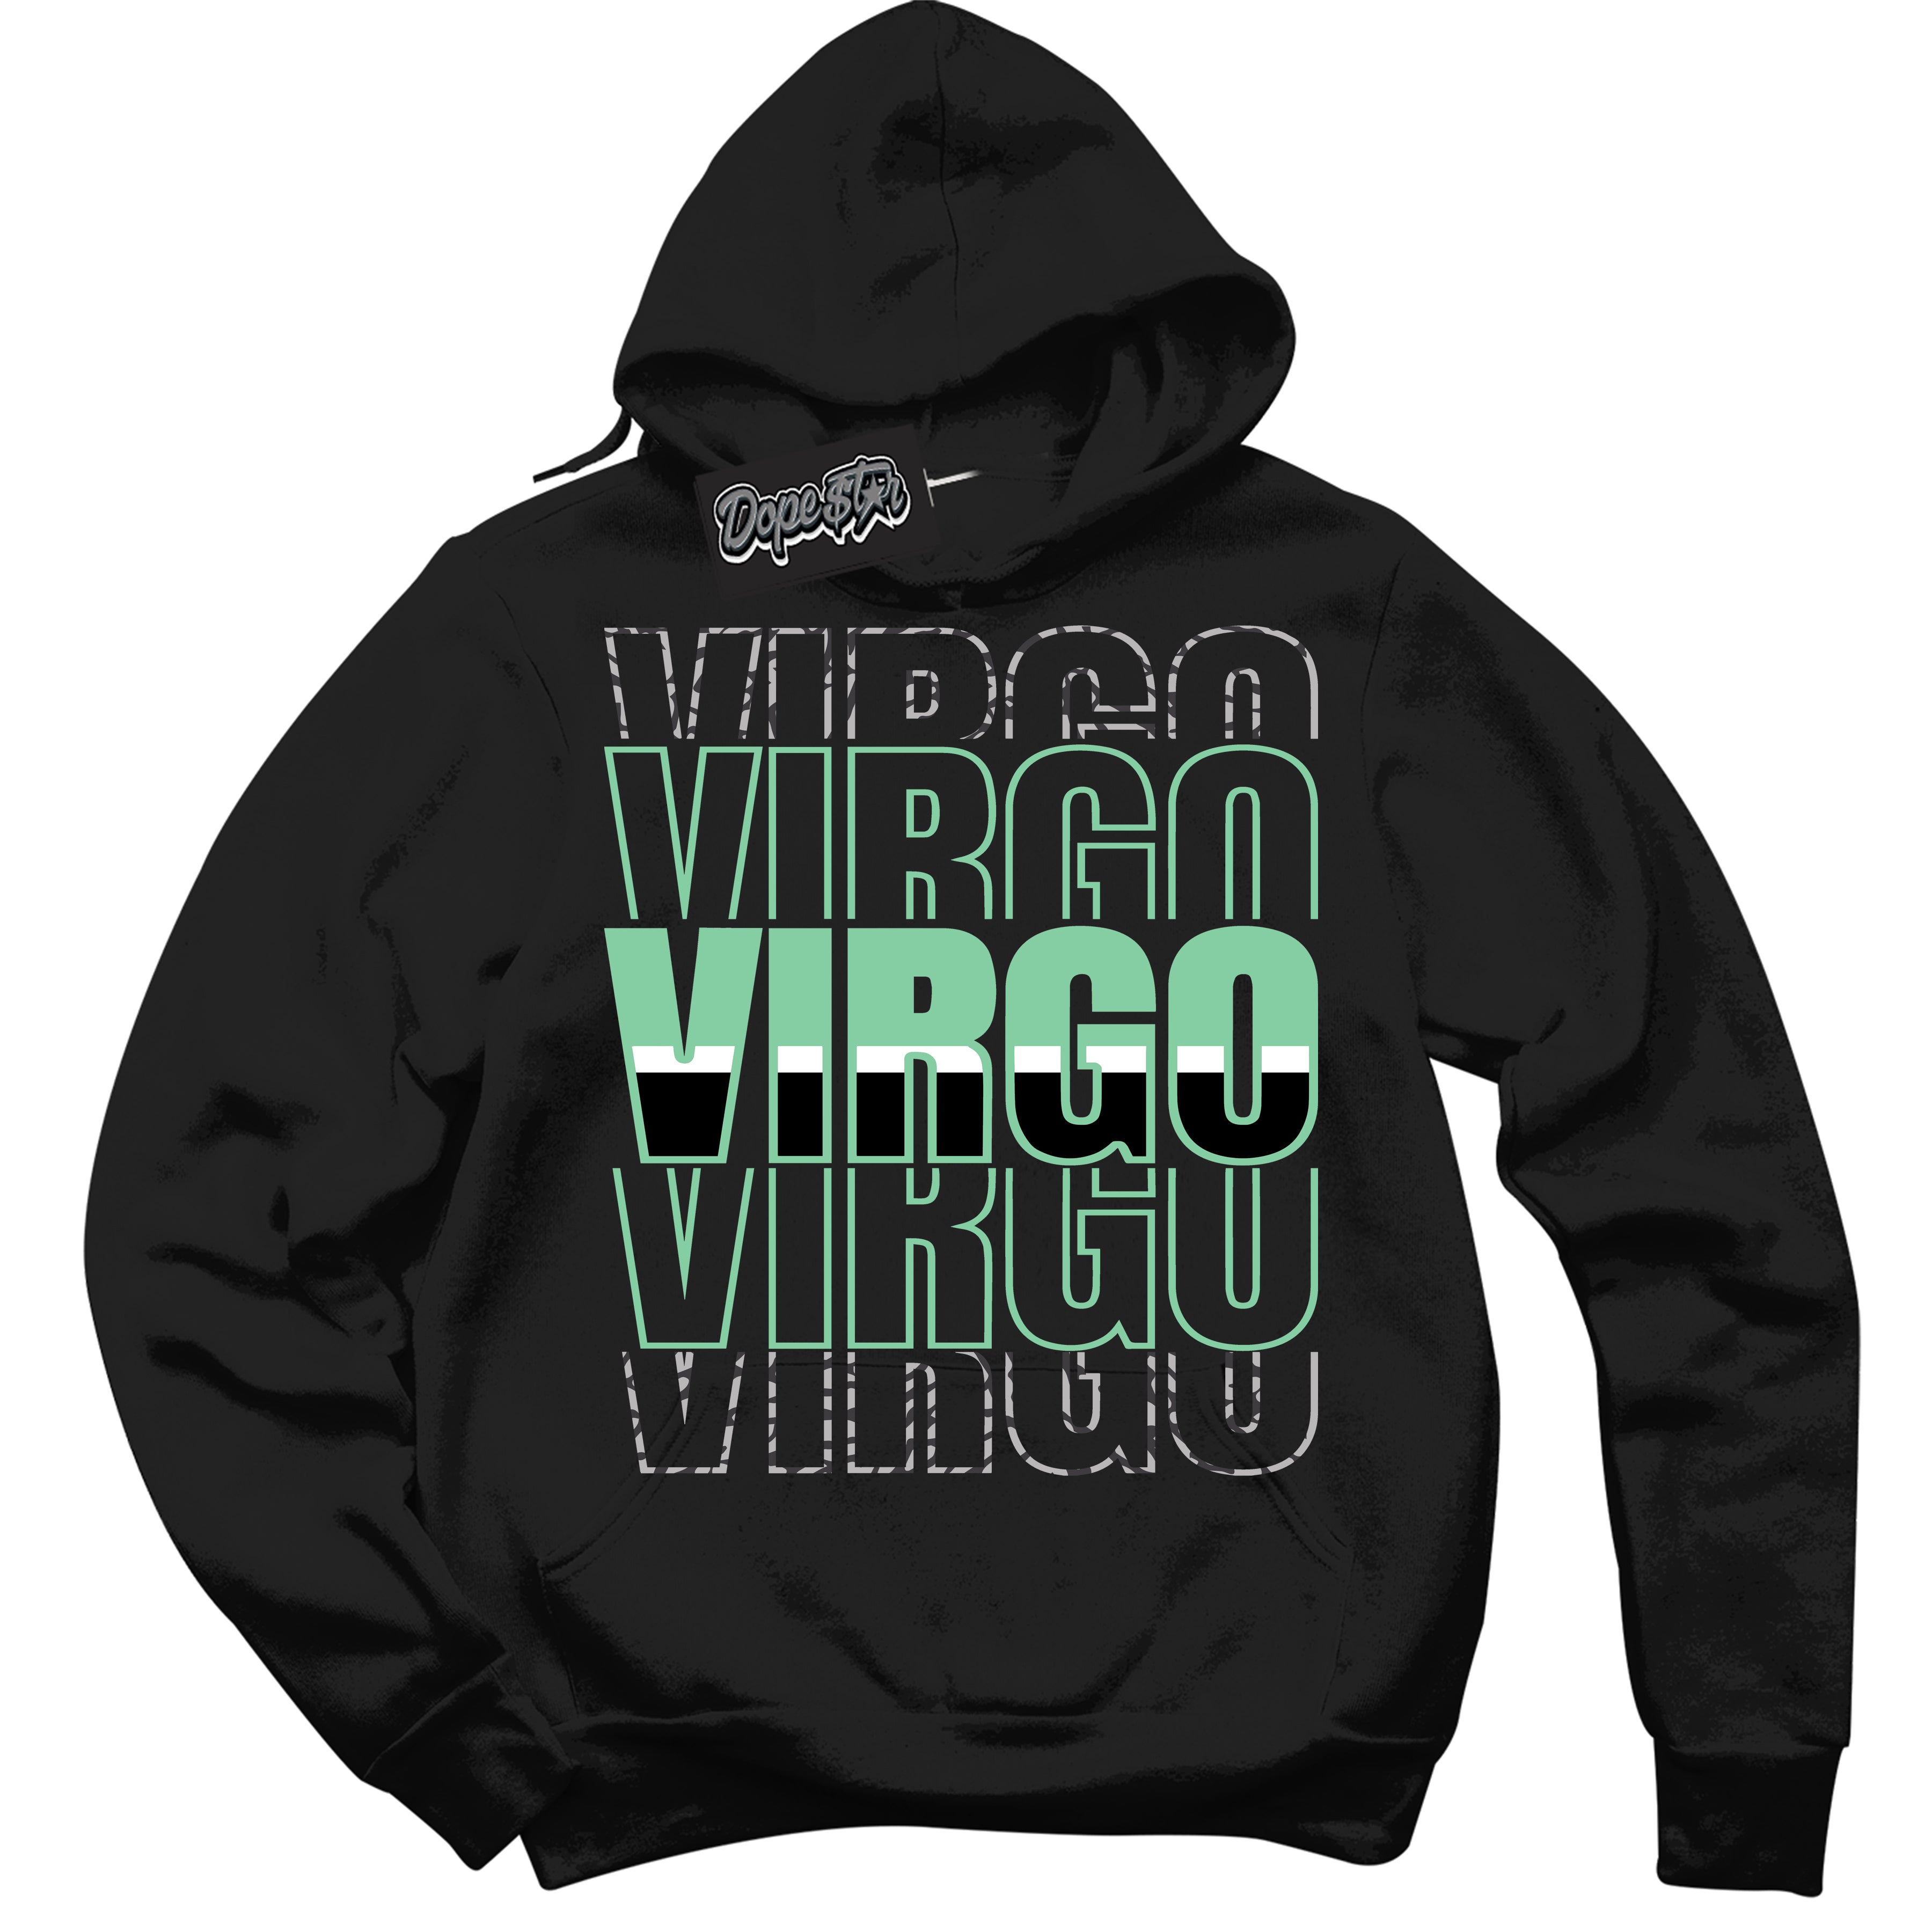 Cool Black Graphic DopeStar Hoodie with “ Virgo “ print, that perfectly matches Green Glow 3S sneakers